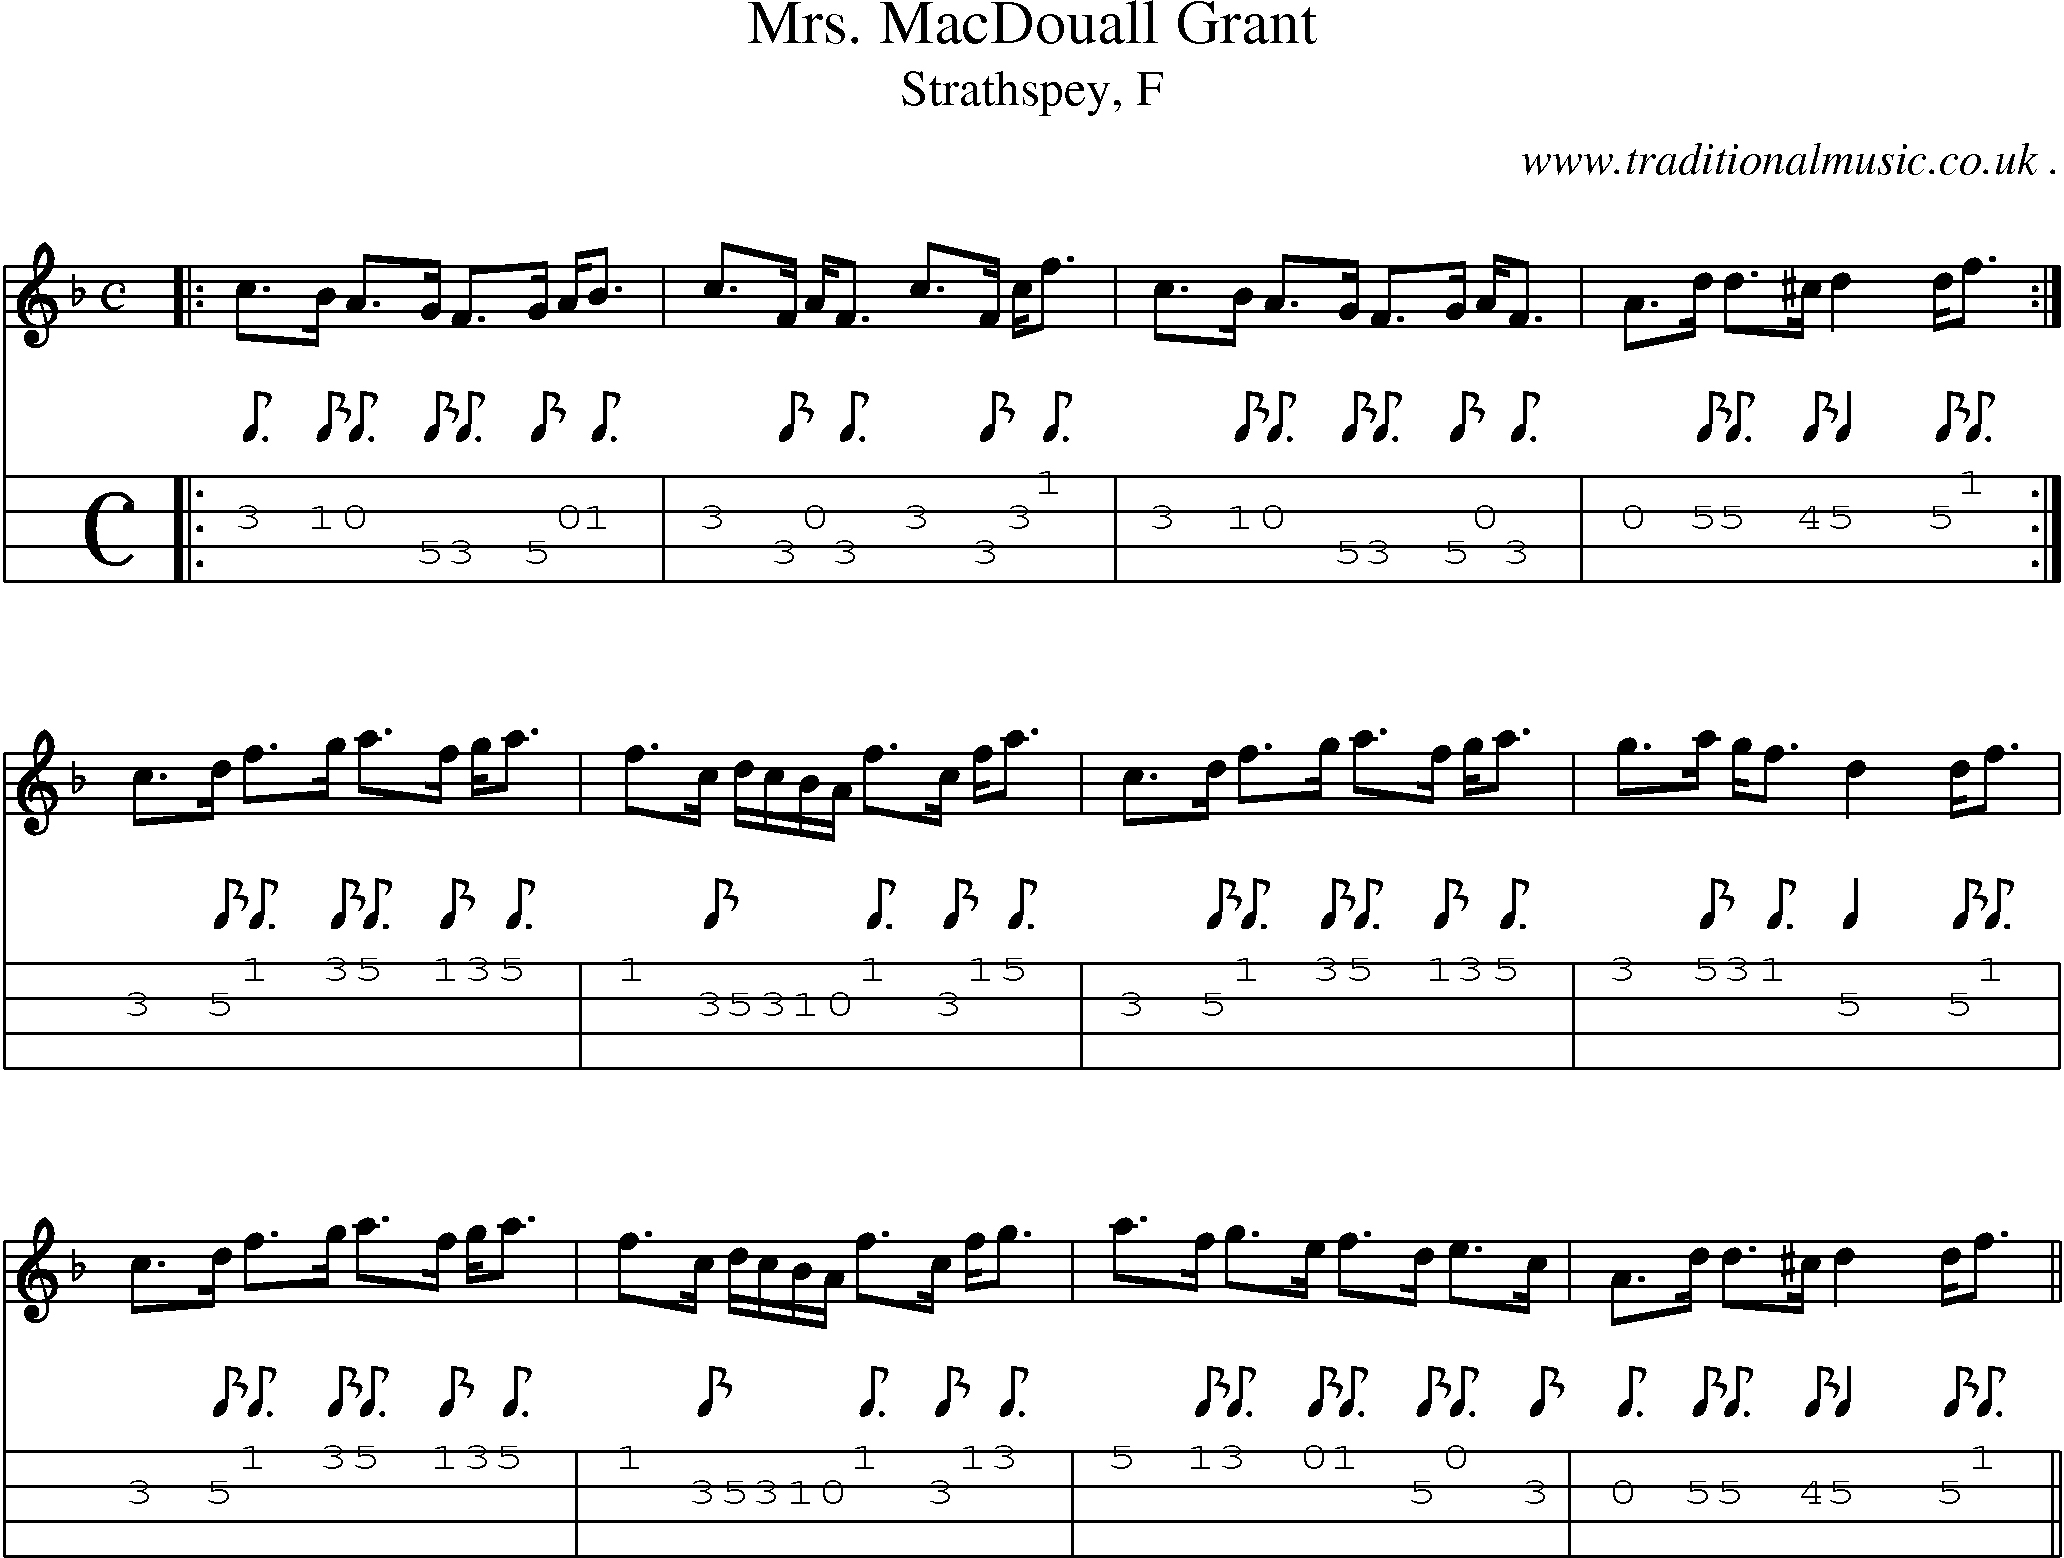 Sheet-music  score, Chords and Mandolin Tabs for Mrs Macdouall Grant